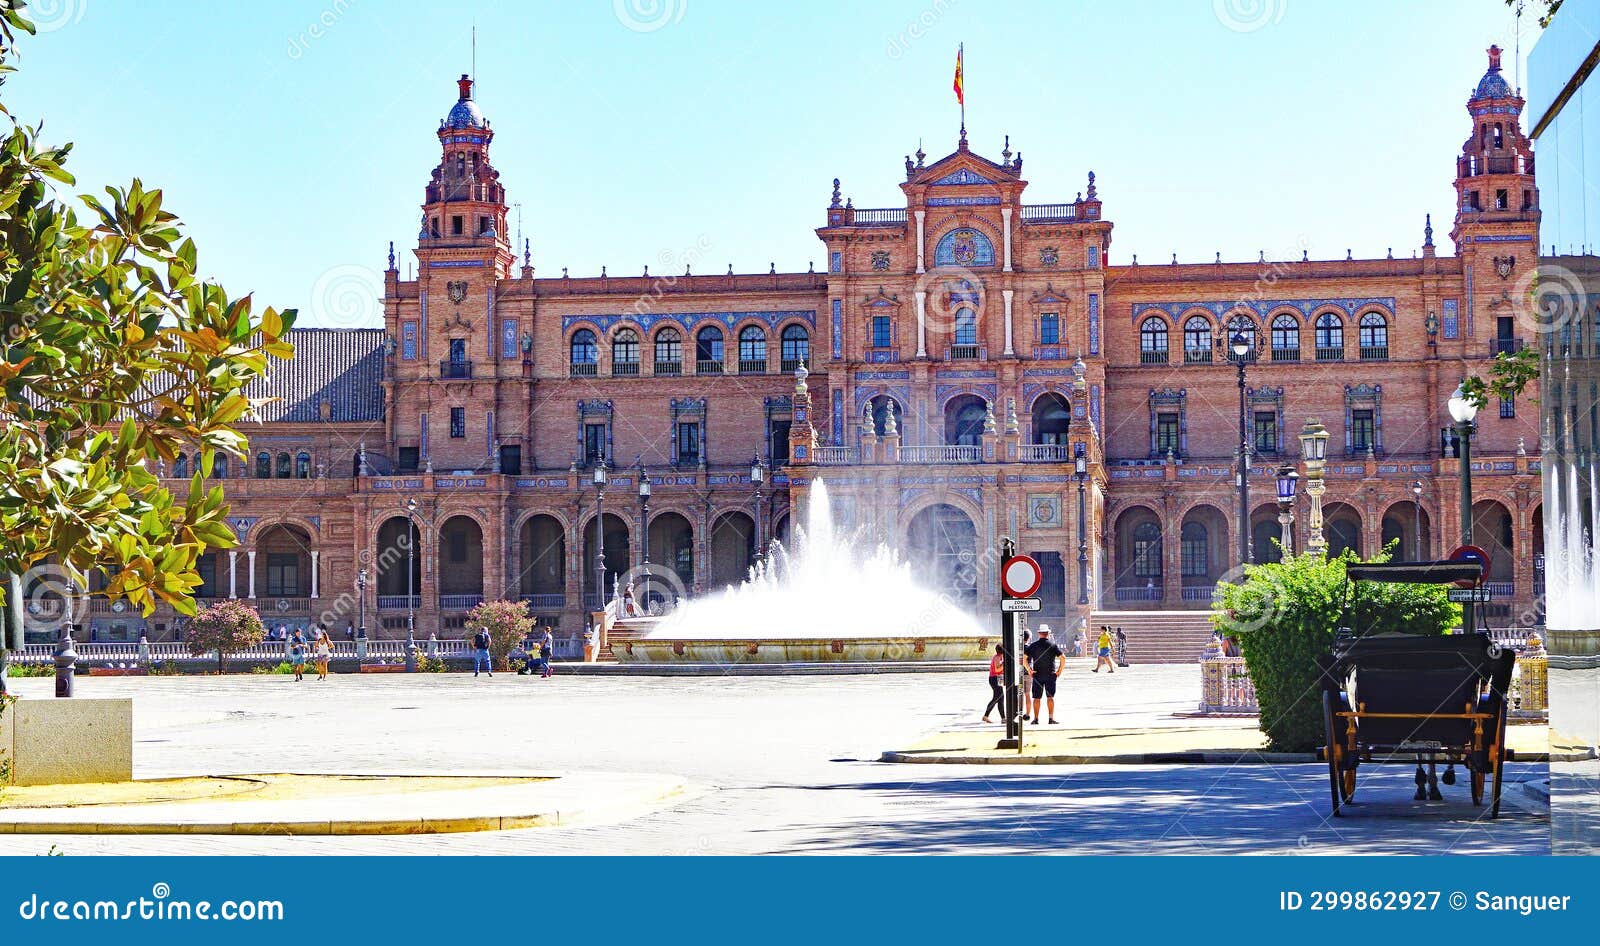 panoramic of plaza espaÃ±a square in seville